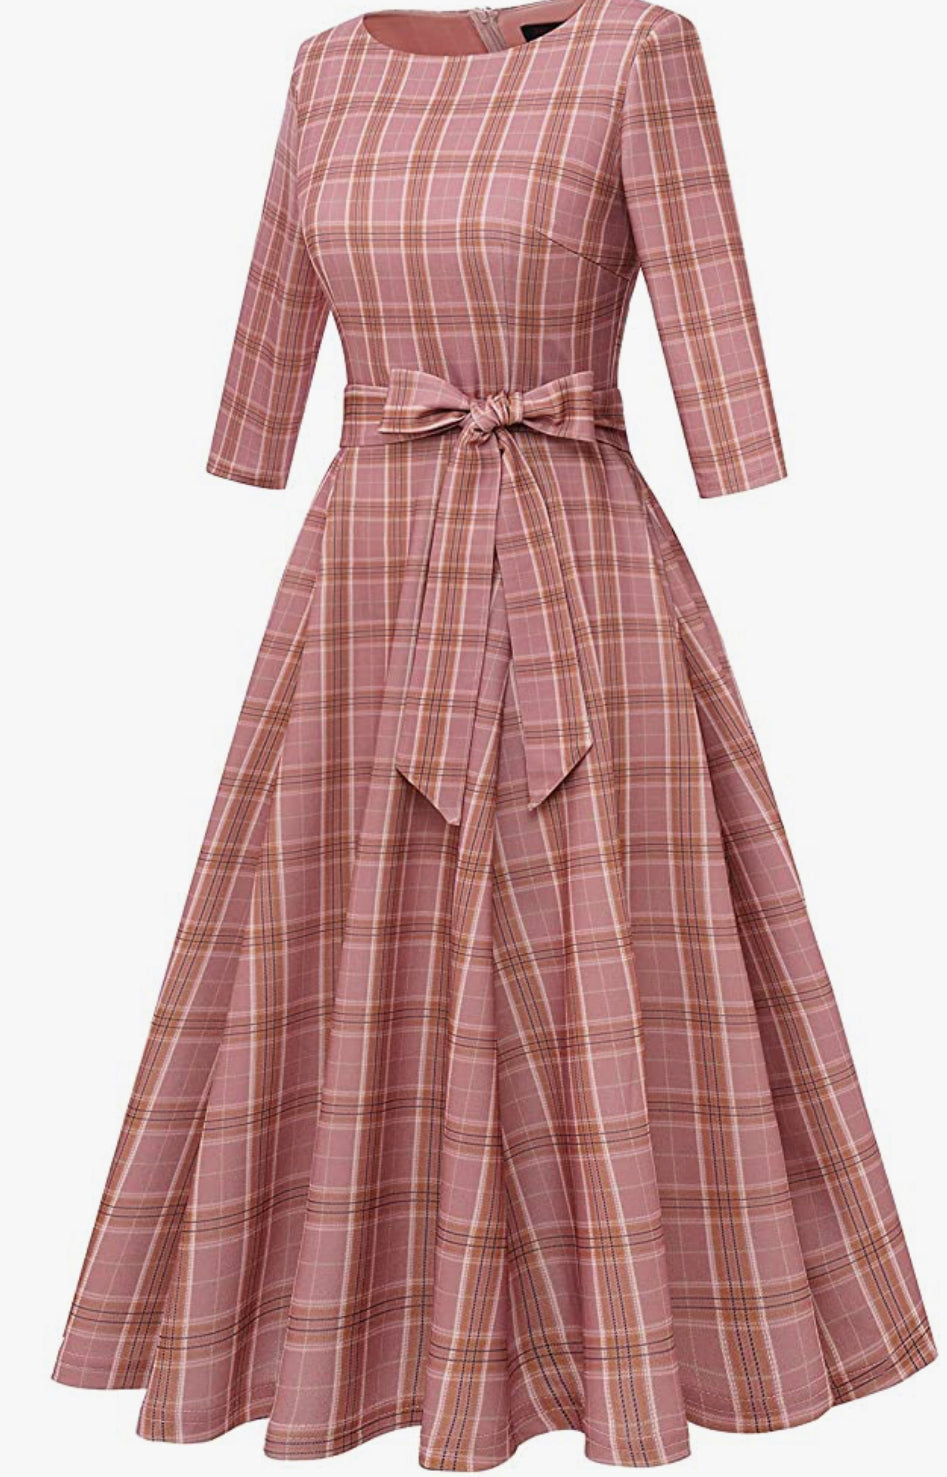 Pink Plaid Print Vintage Inspired Scoop Neck Dress, Sizes XSmall - 3XLarge